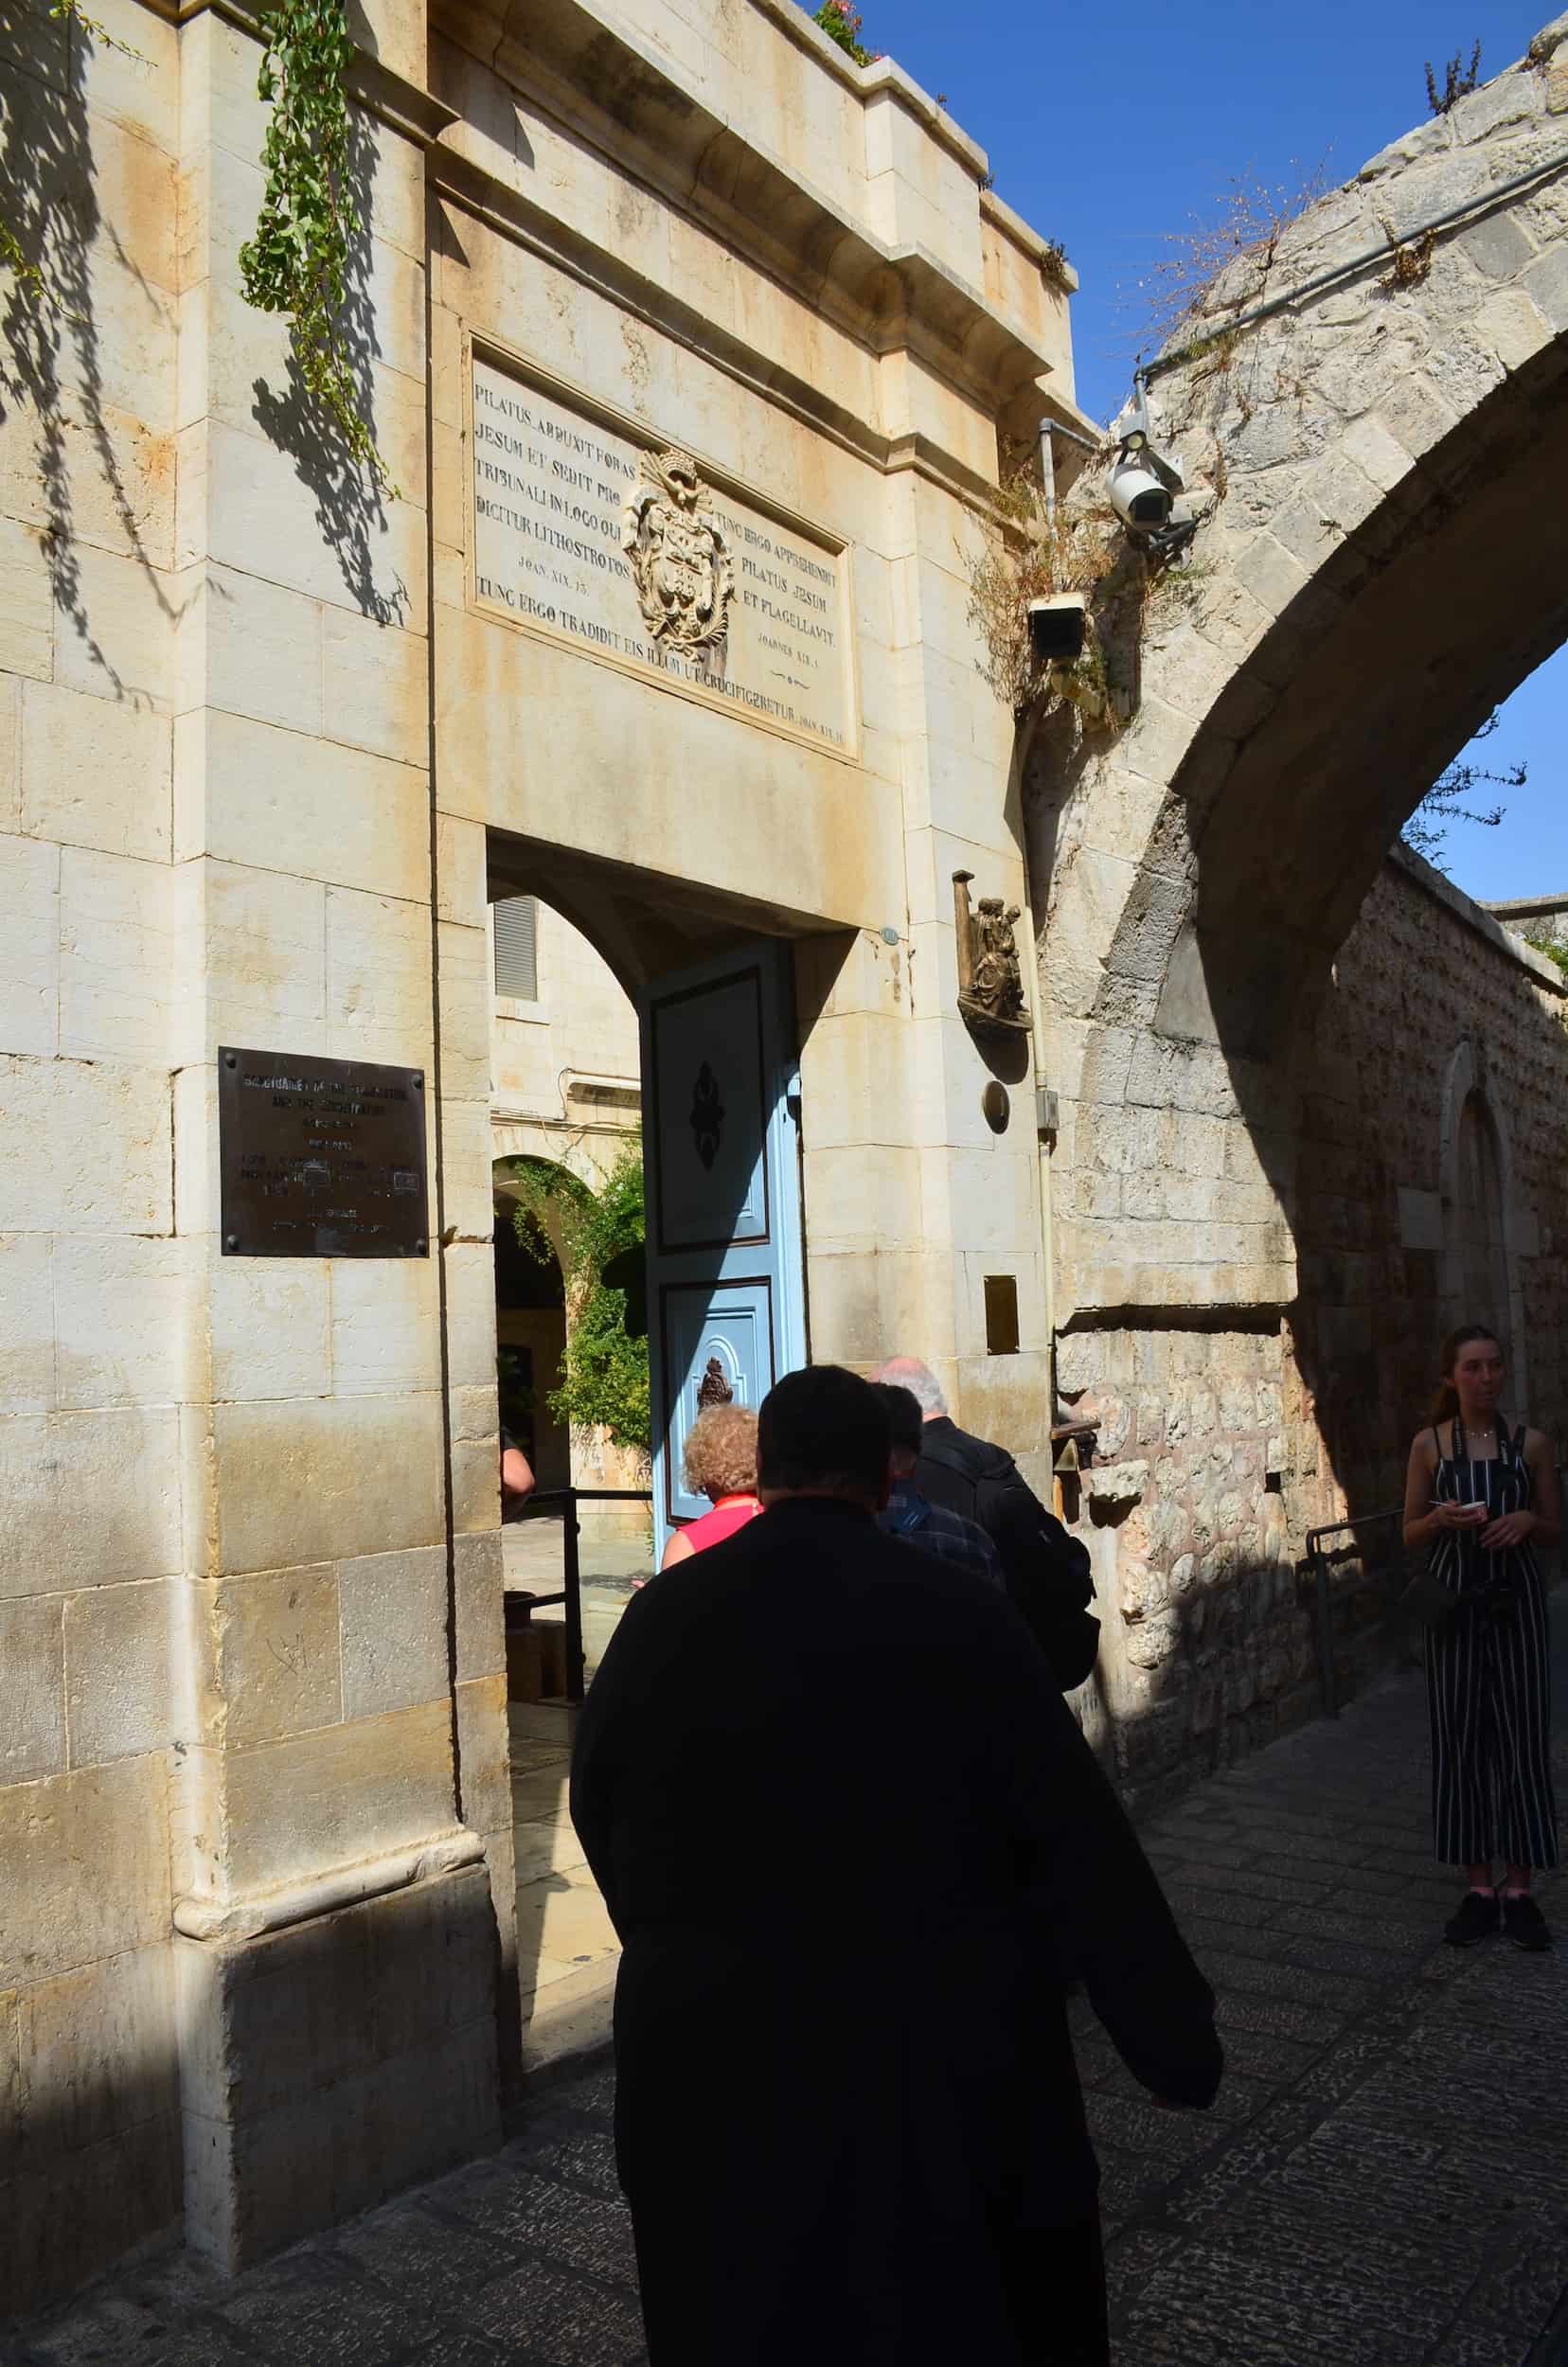 Entrance of the Monastery of the Flagellation in Jerusalem